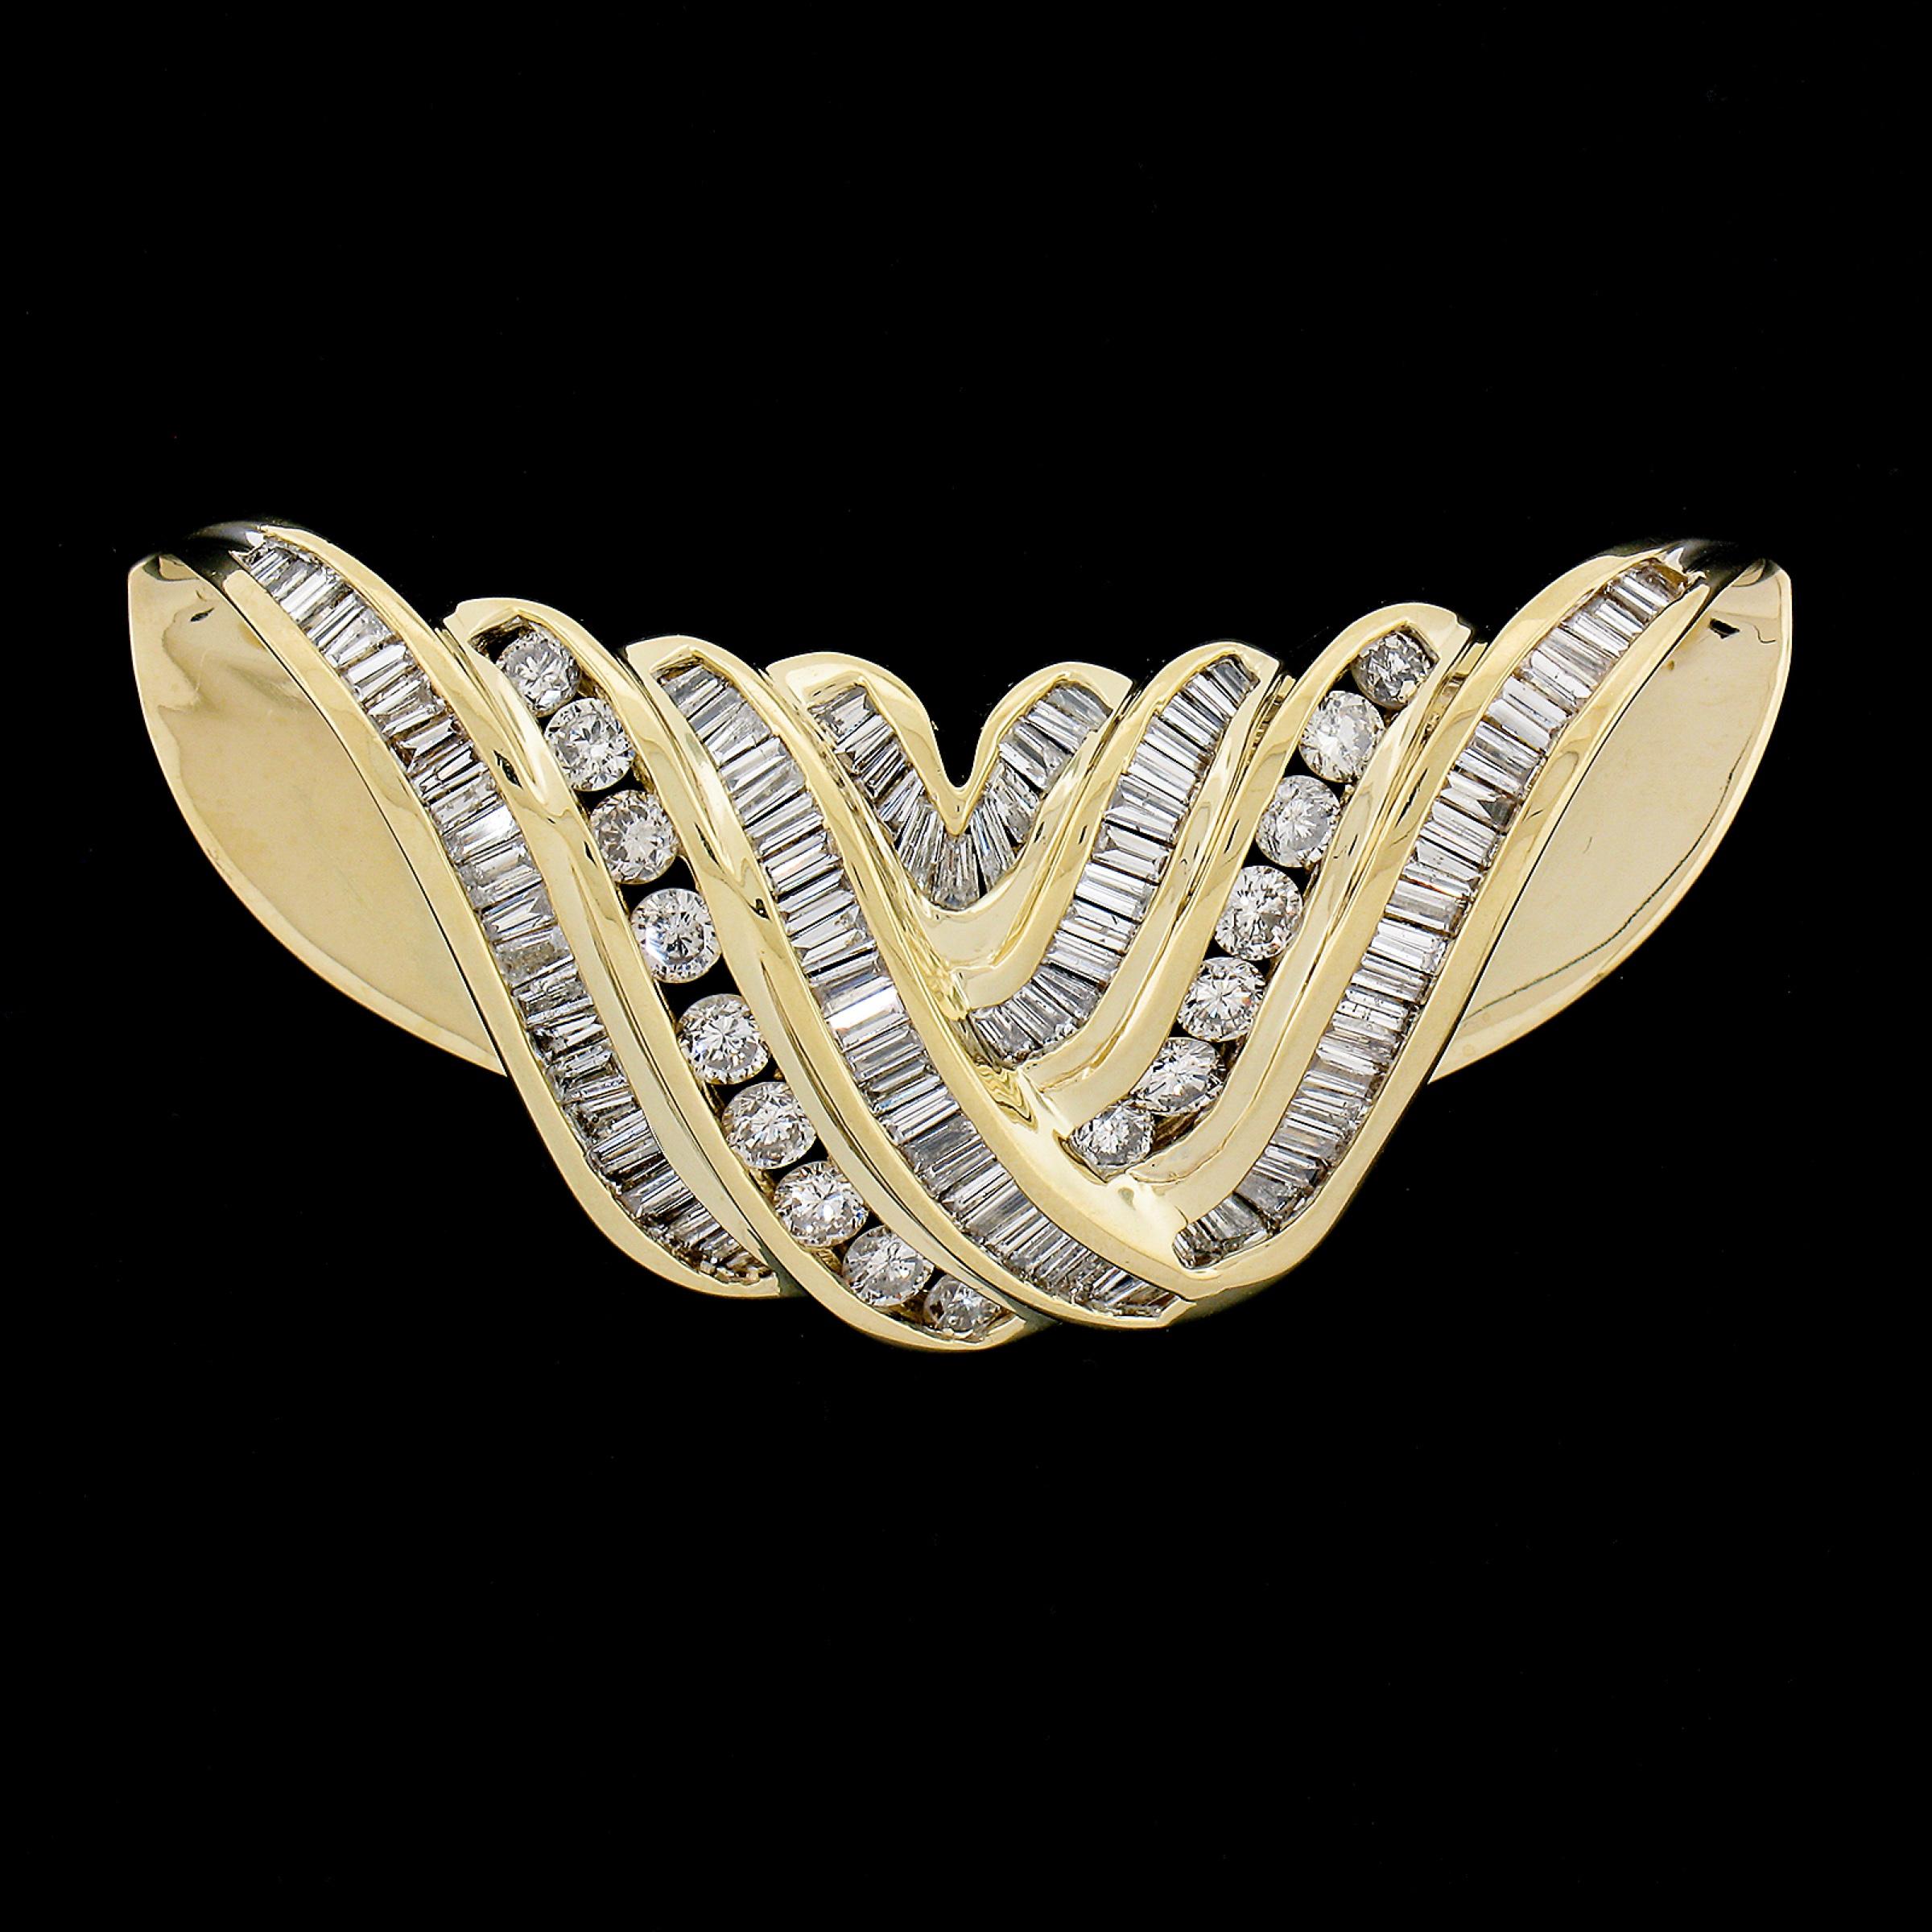 --Stones:--
113 Natural Genuine Diamonds - 97 Baguette Cut and 16 Round Brilliant Cut- Channel Set - SI1/I1 Clarity - J/K Color - 3ctw approx.
Total Carat Weight:	3 approx.

Material: Solid 14k Yellow Gold
Weight: 14.91 Grams
Width: 47.6mm (1.8